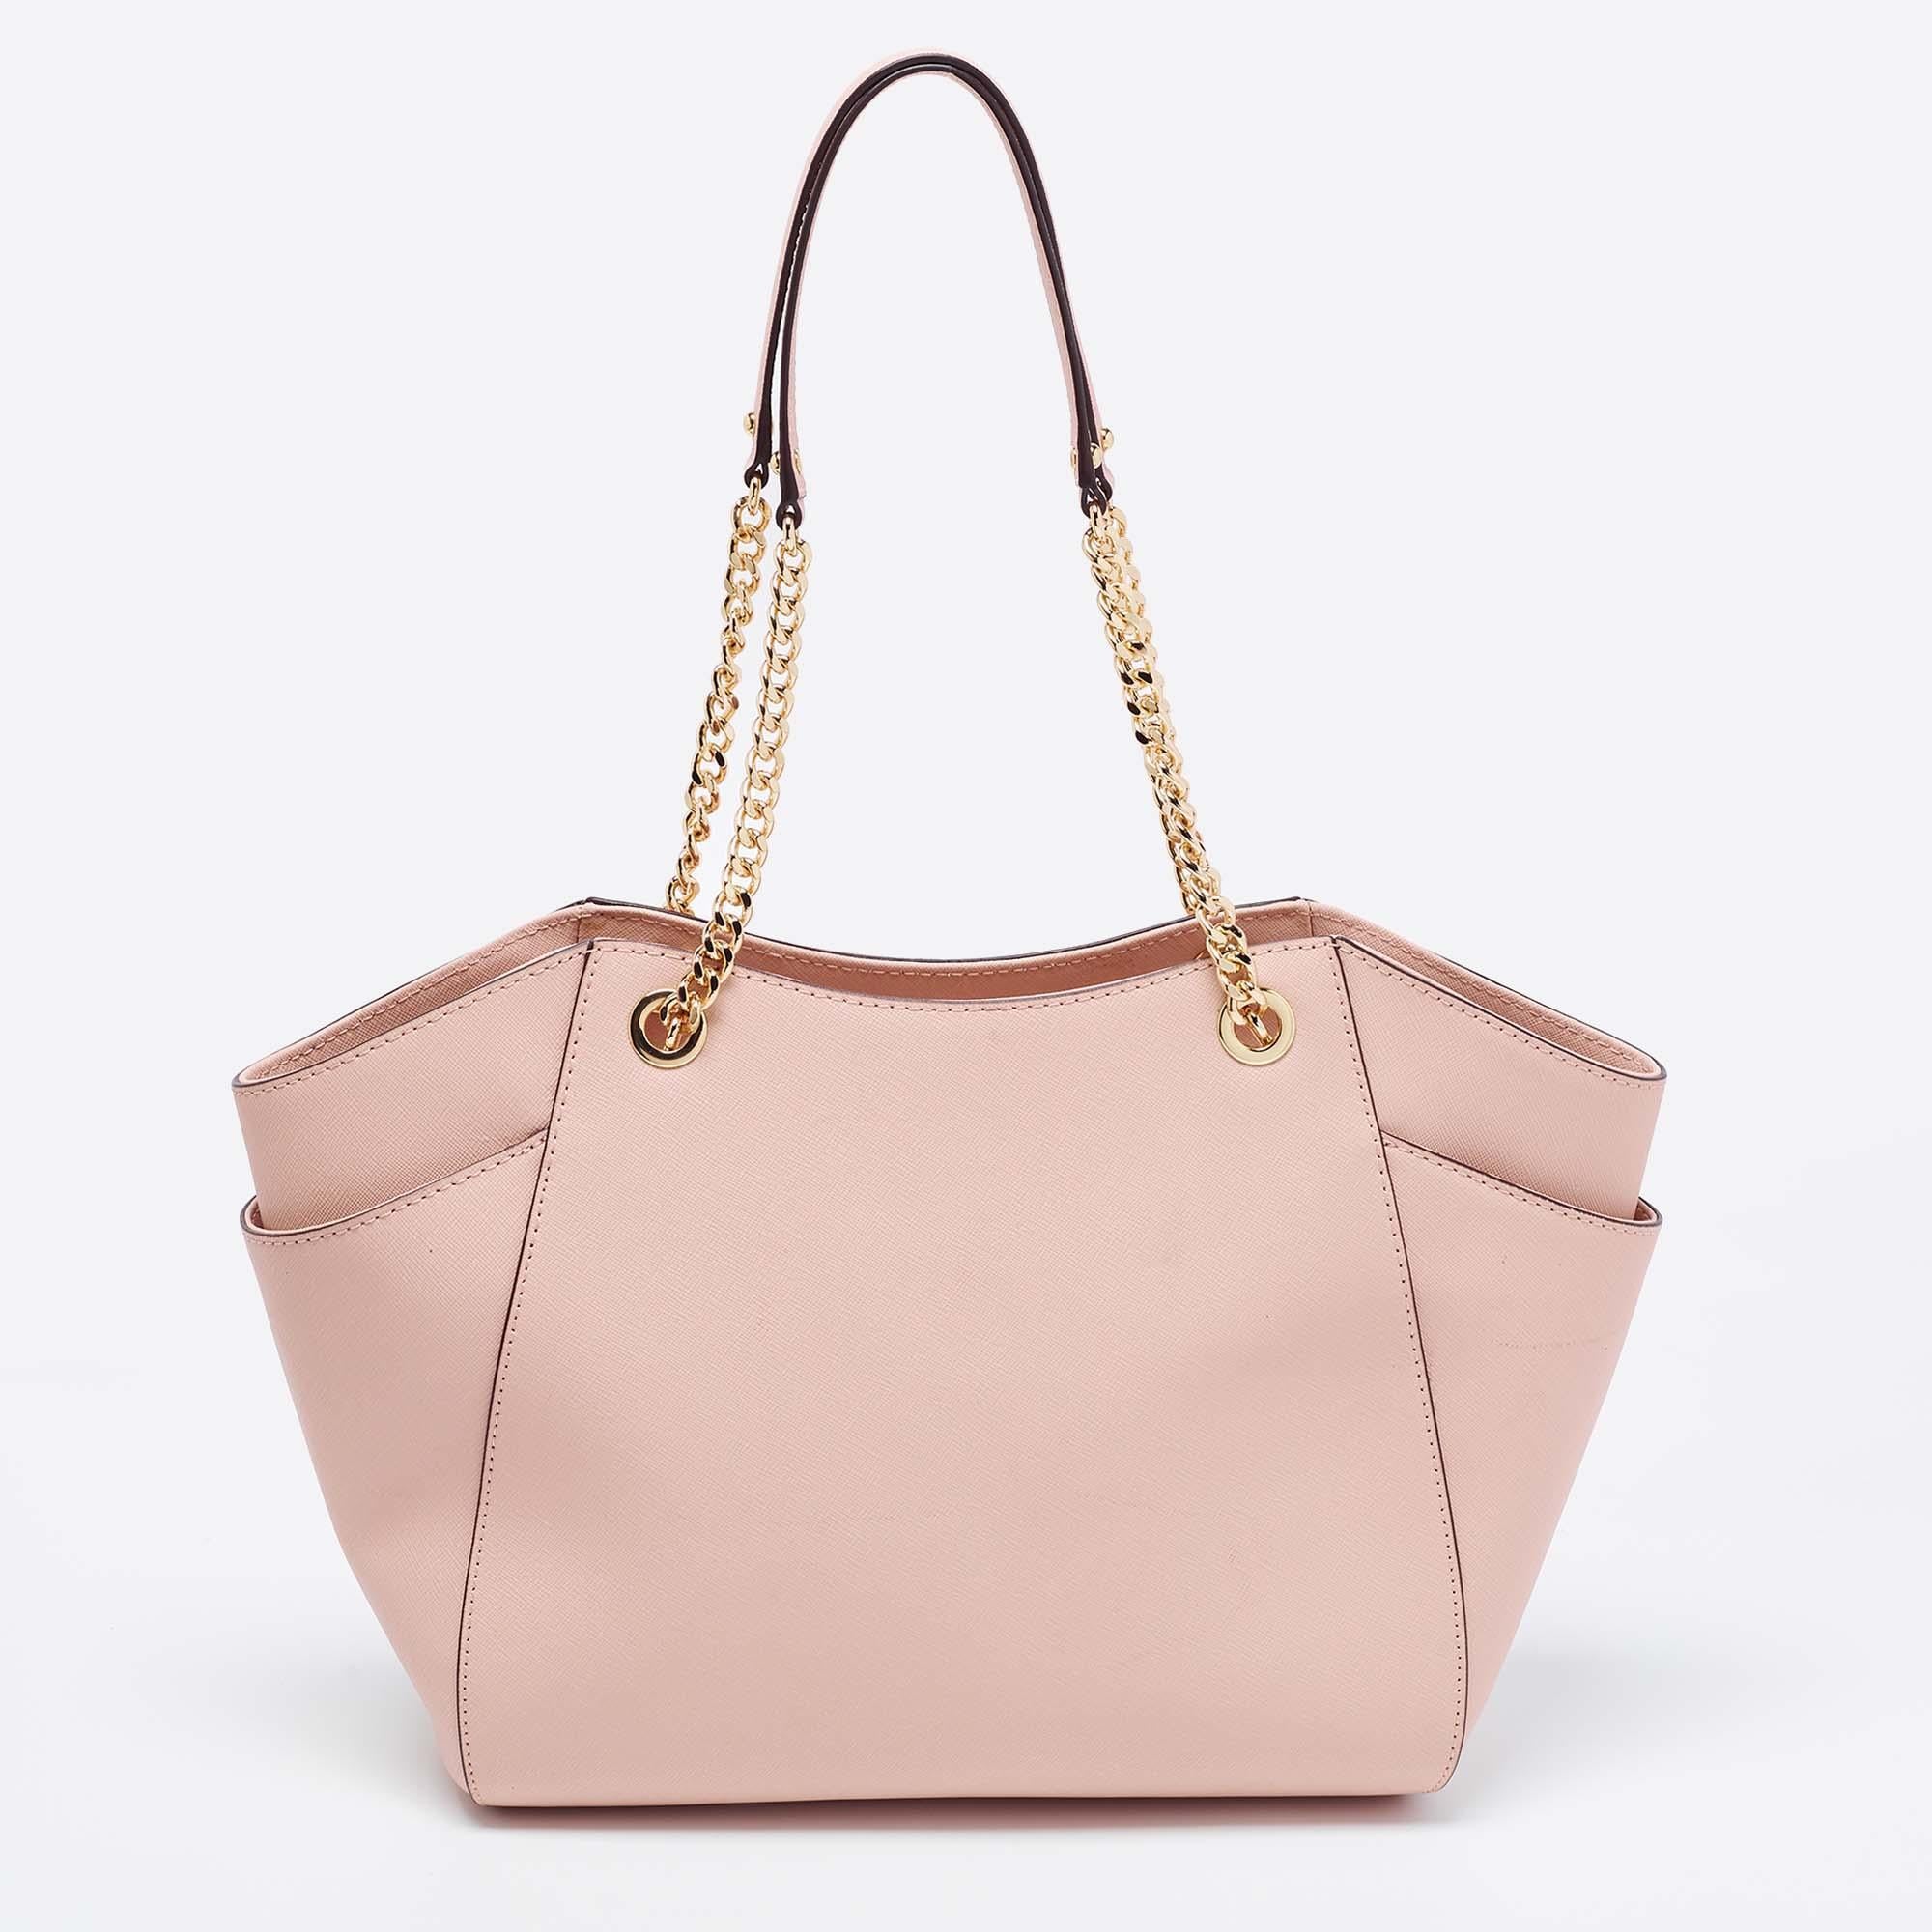 This Michael Kors Jet Set Travel tote aims to provide you with practical ease. With a beautiful design and striking structure, this leather bag is filled with luxurious details. It exhibits dual chain-leather handles for you to carry it in a chic